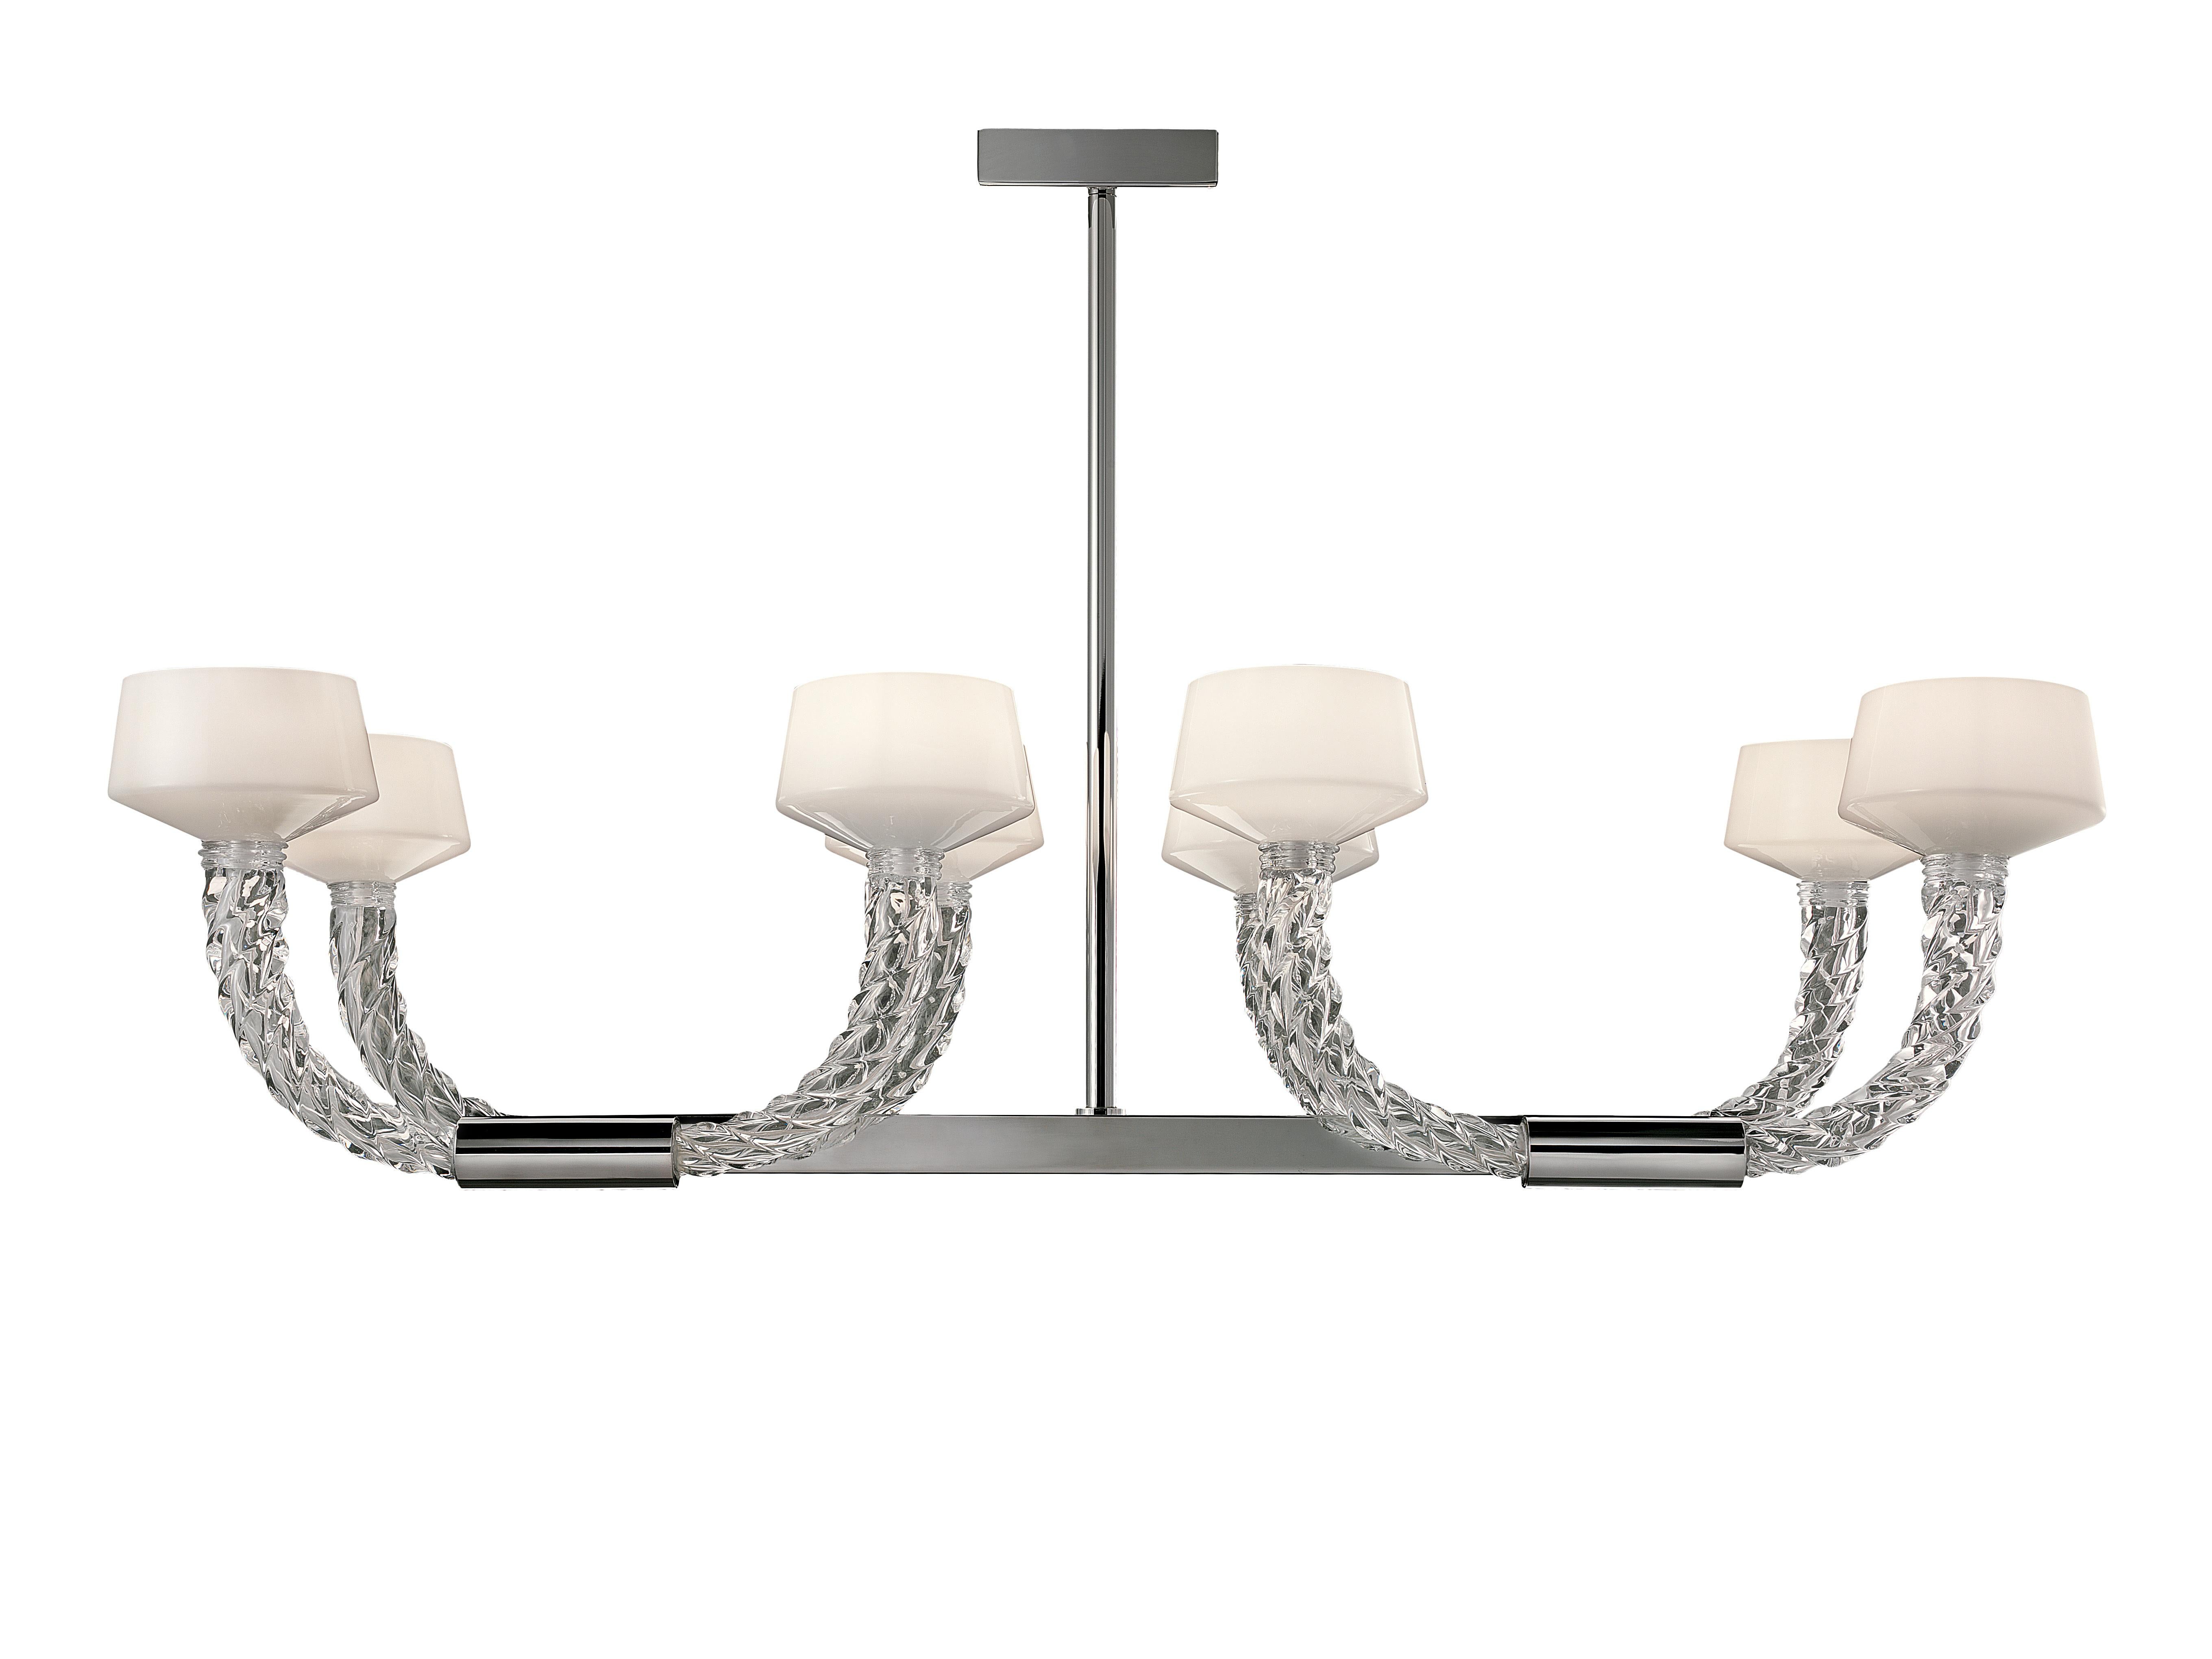 Twins 7226 08 Chandelier in Glass with Chrome Finishing, by Barovier&Toso